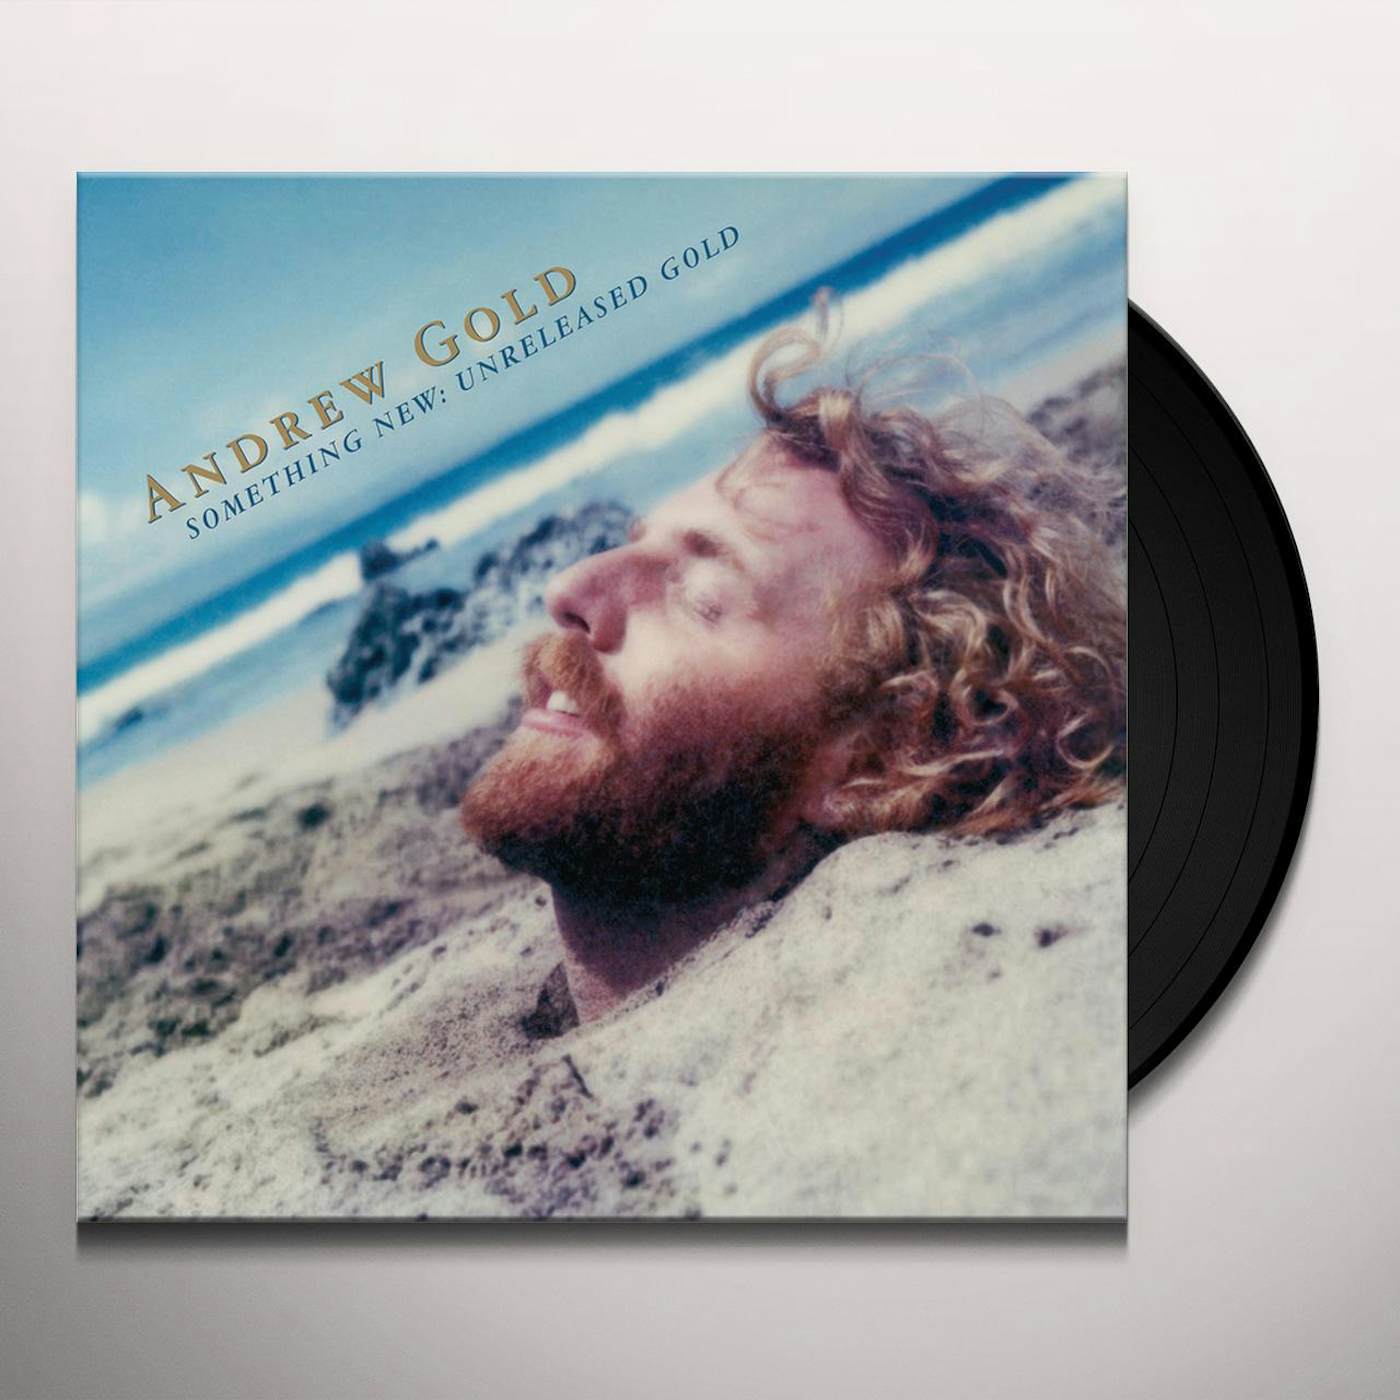 Andrew Gold SOMETHING NEW: UNRELEASED GOLD (RSD) Vinyl Record